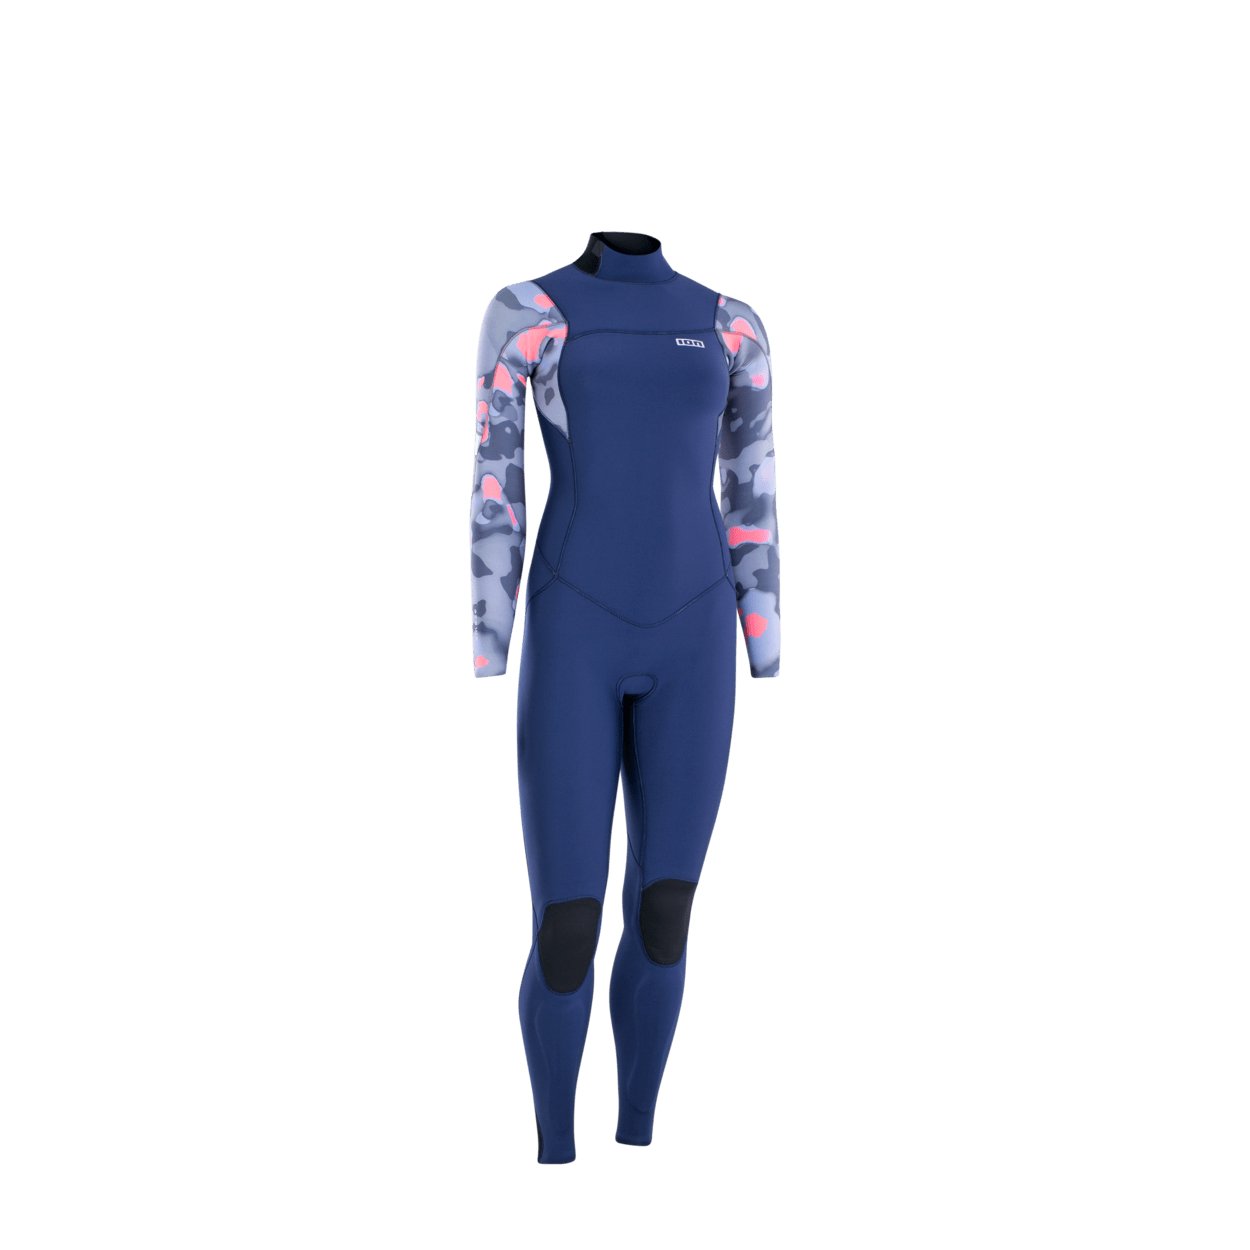 ION Women Wetsuit Amaze Amp 5/4 Back Zip 2023 - Worthing Watersports - 9010583057460 - Wetsuits - ION Water